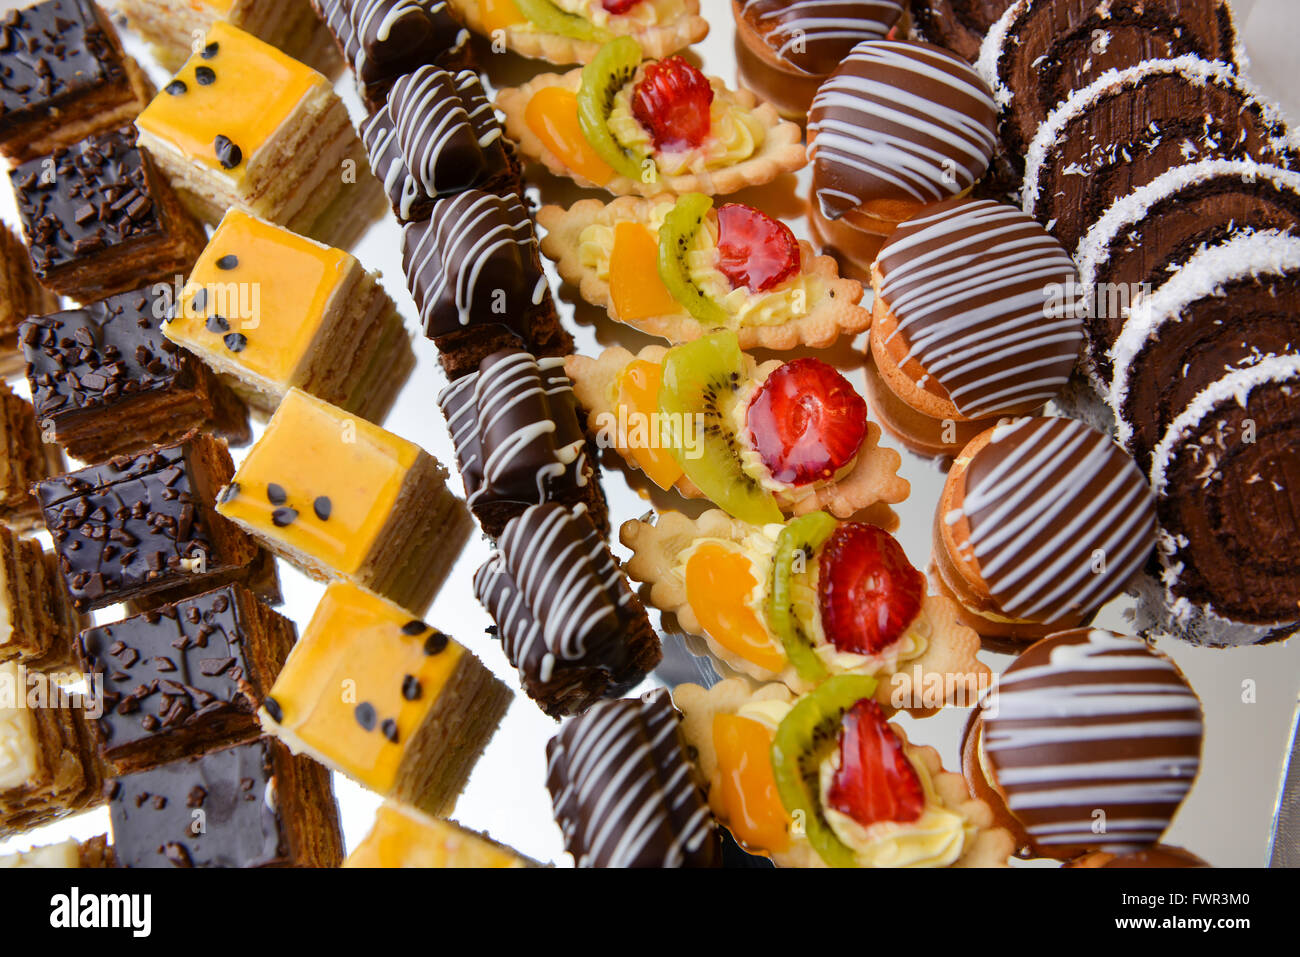 Different type of cakes with chocolate, vanilla and fruits Stock Photo